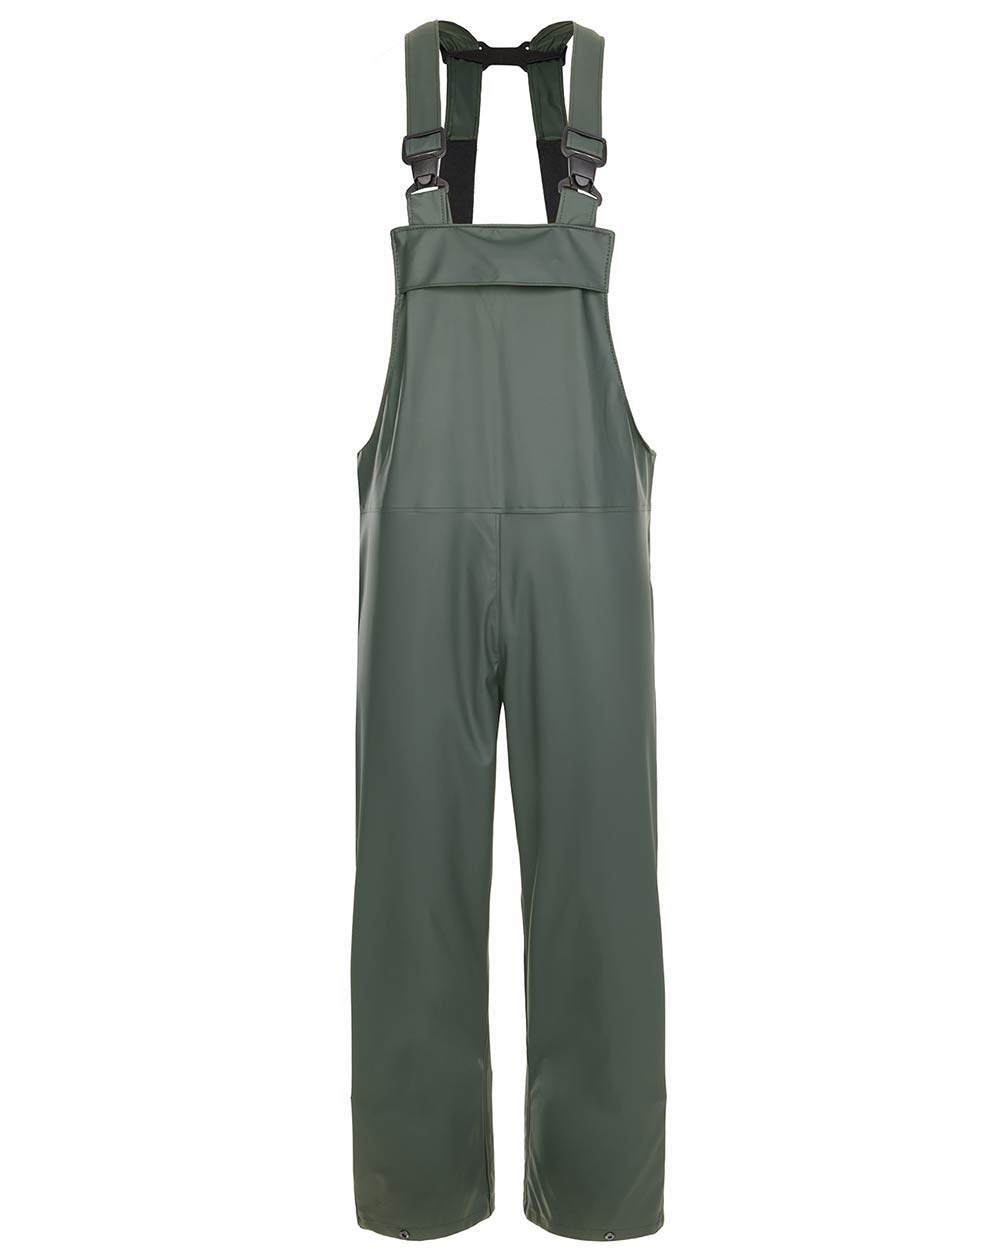 Fort Airflex Waterproof Breathable Bib and Brace Overalls in Olive 